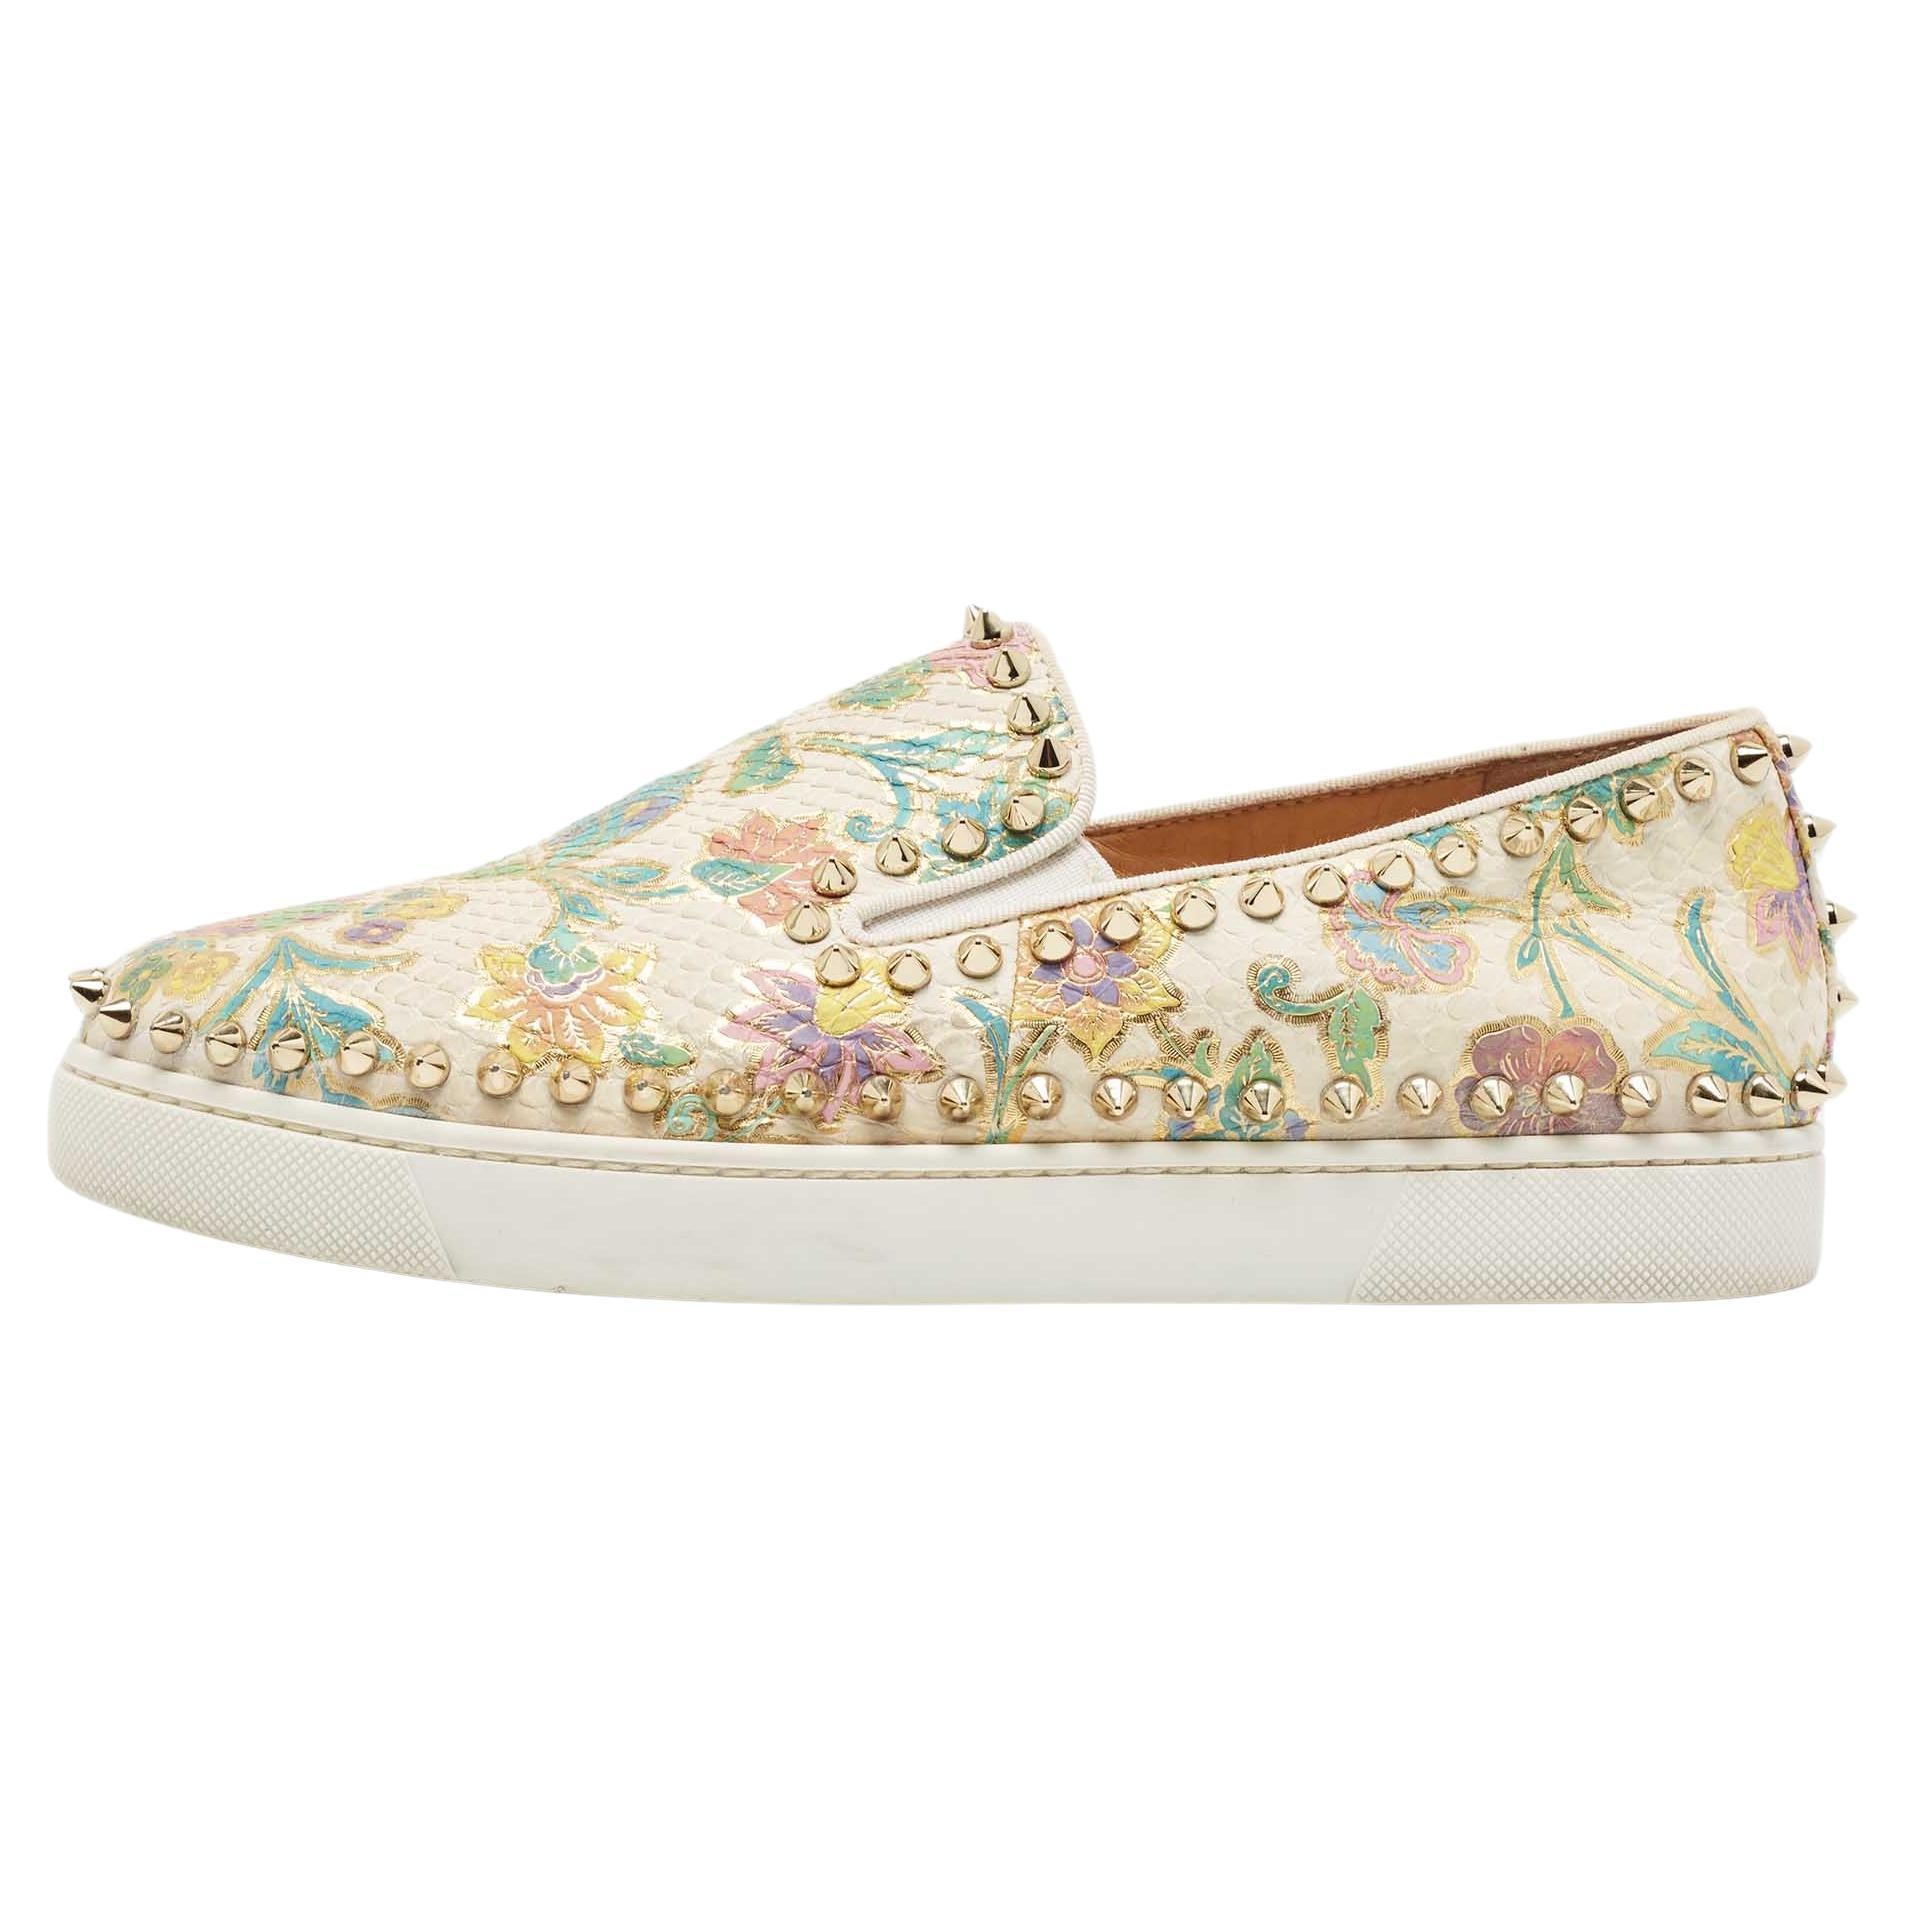 Christian Louboutin Floral Print Embossed Snakeskin Pik Boat Sneakers Size 38.5 For Sale